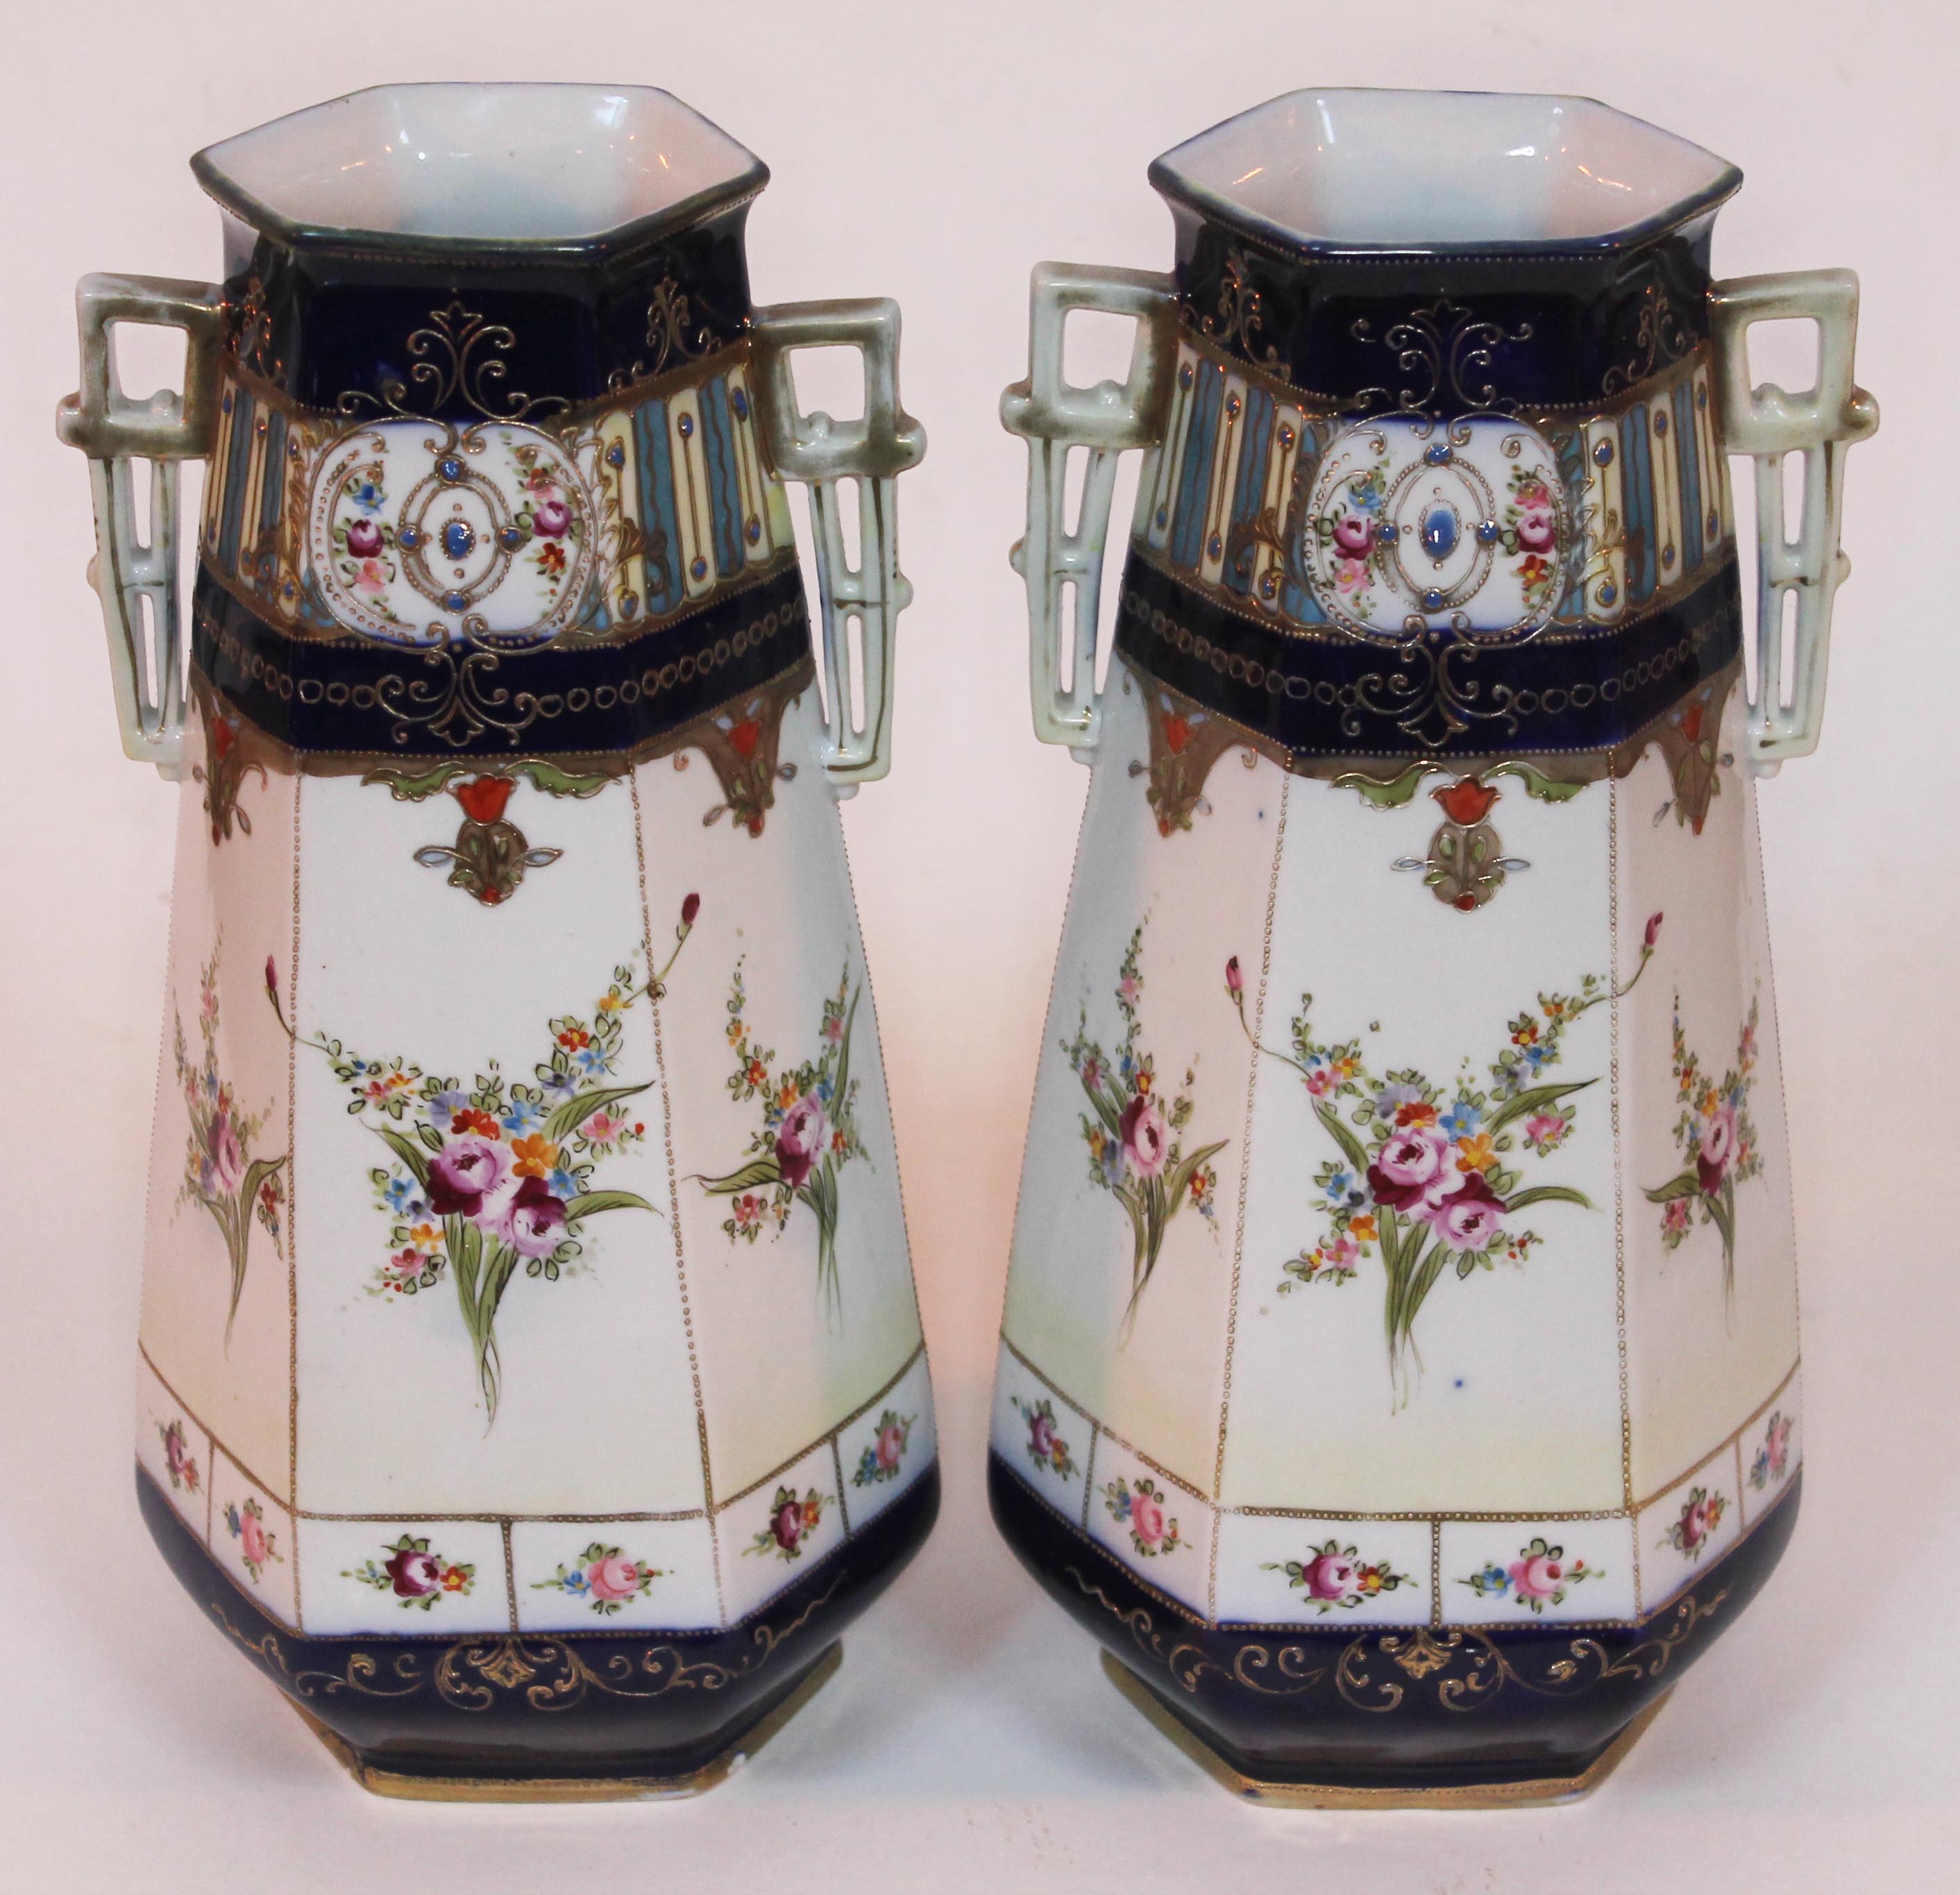 A pair of Japanese Kinjo porcelain vases, height 30cm. Condition - good, no chips, cracks nor any